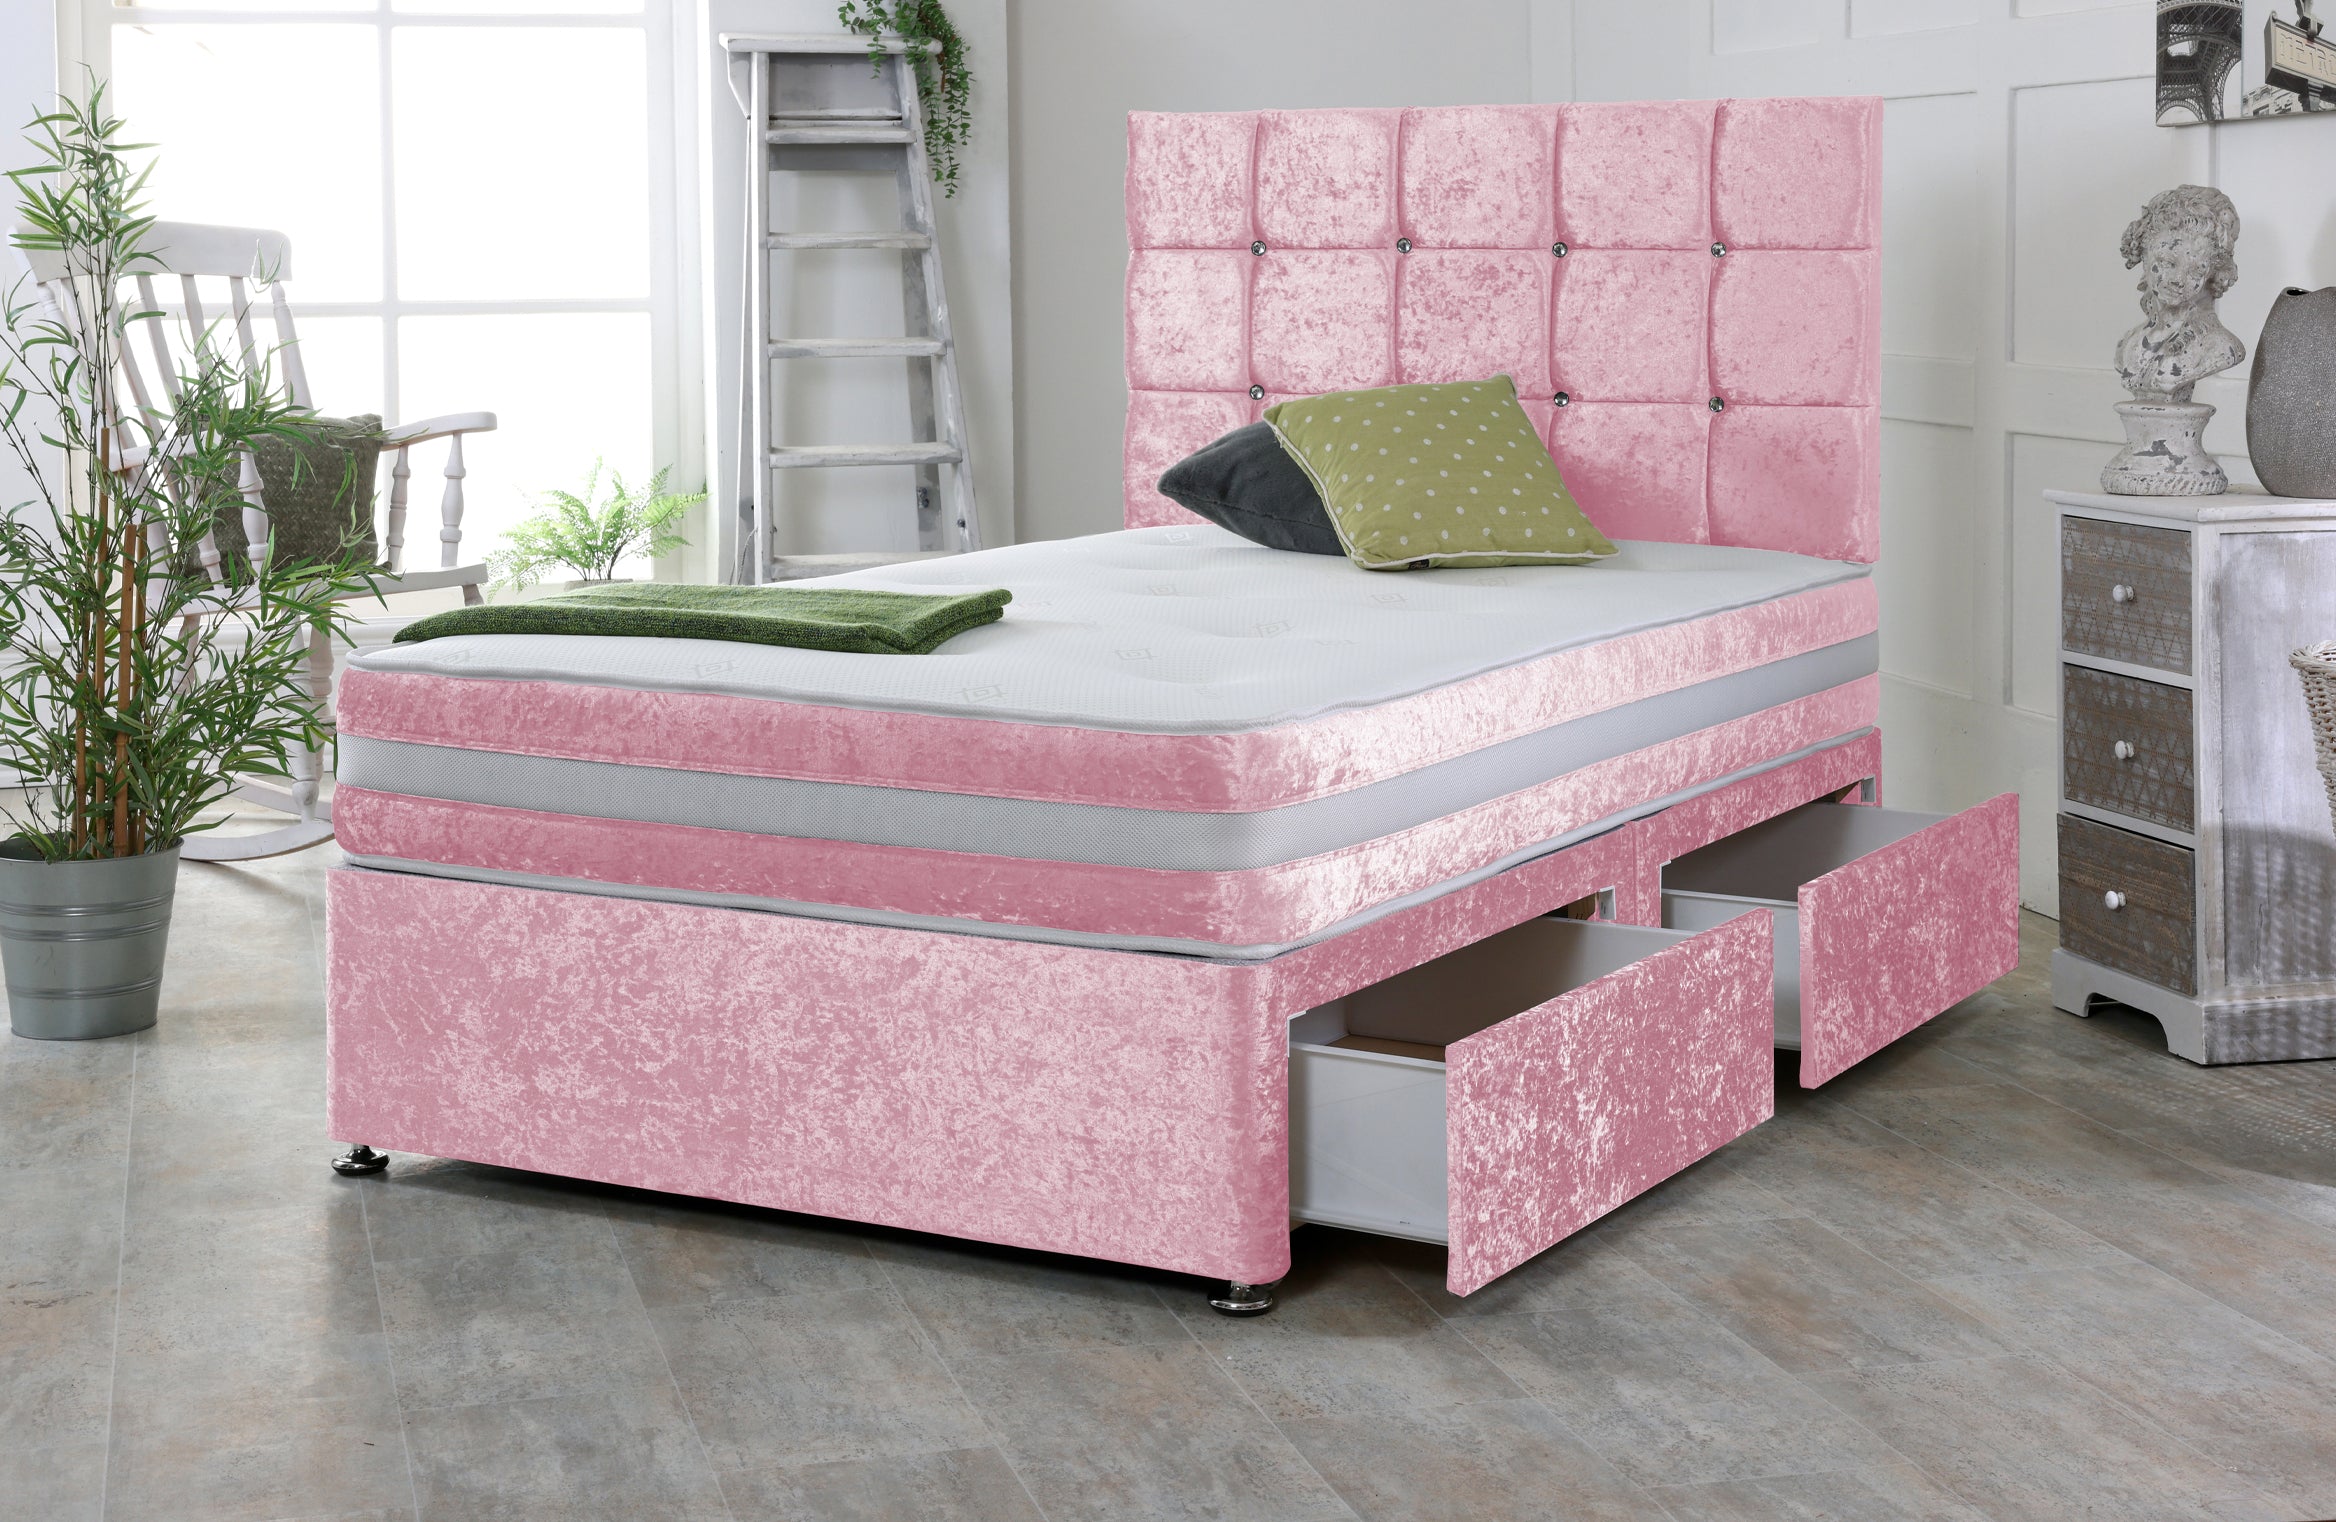 Cube Crushed Velvet Divan Bed Base Set with Mattress and Headboard